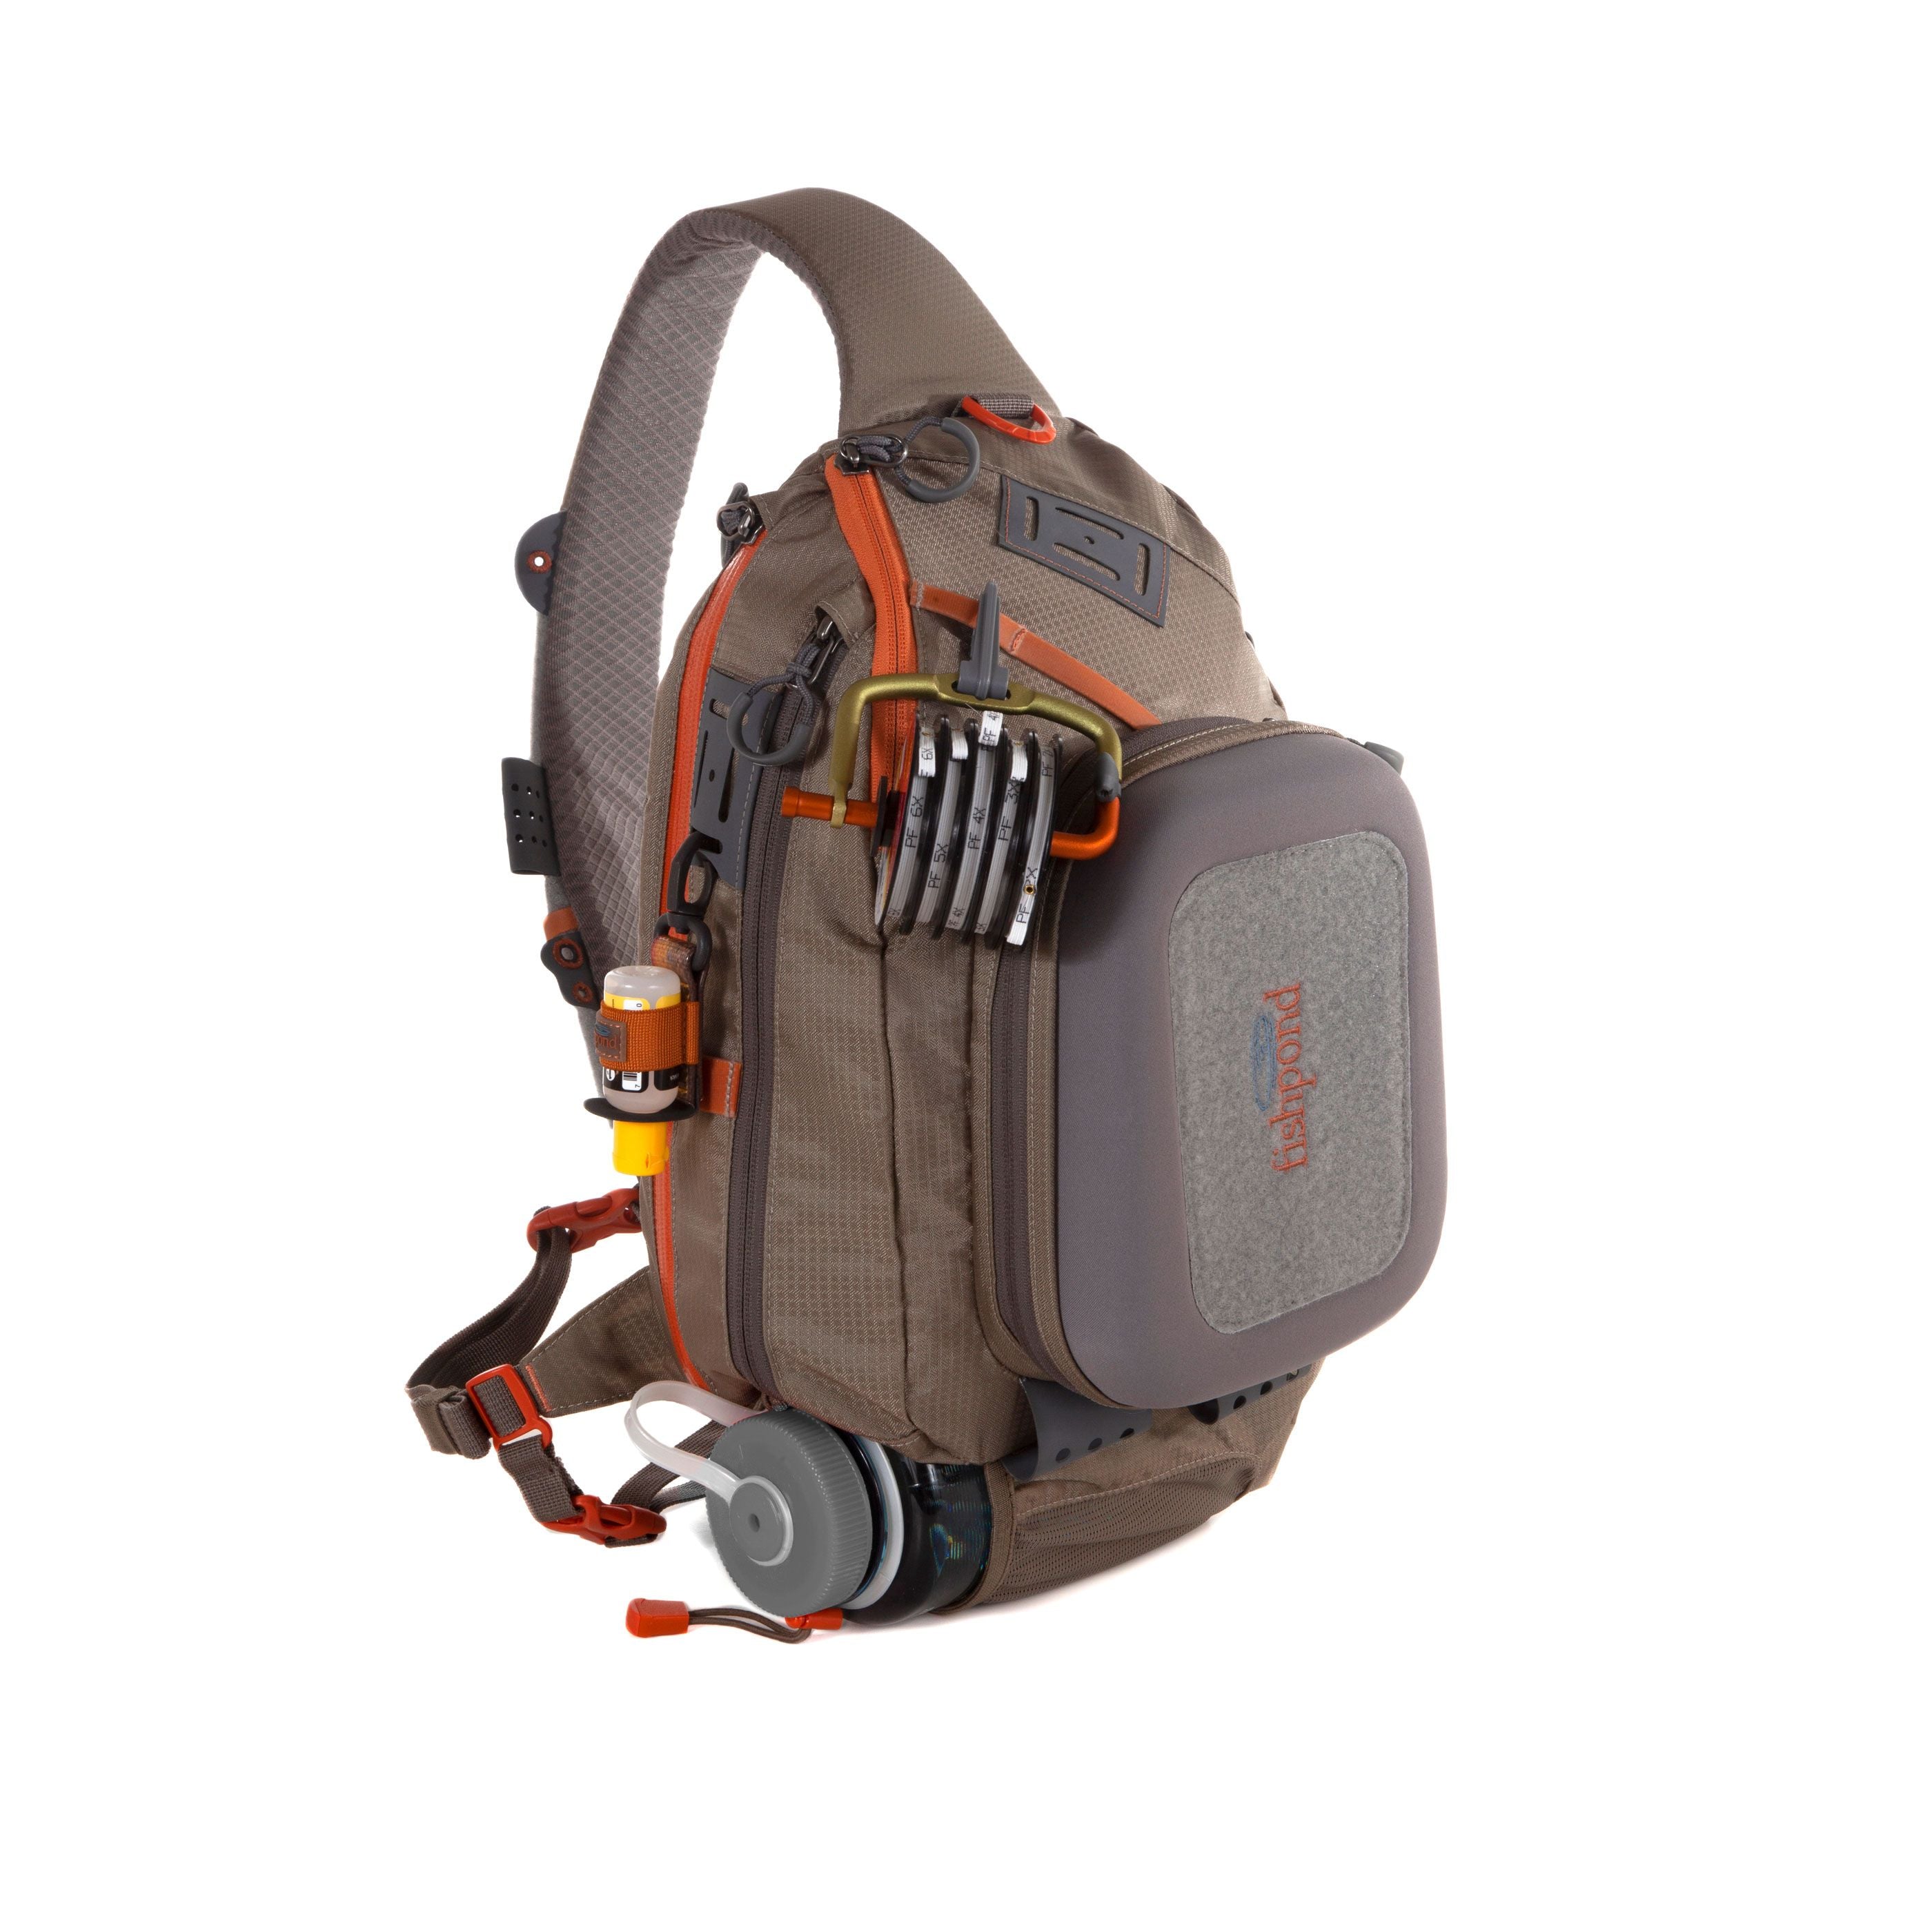  Fly Fishing Chest Bag Waist Packs For Outdoor Activities